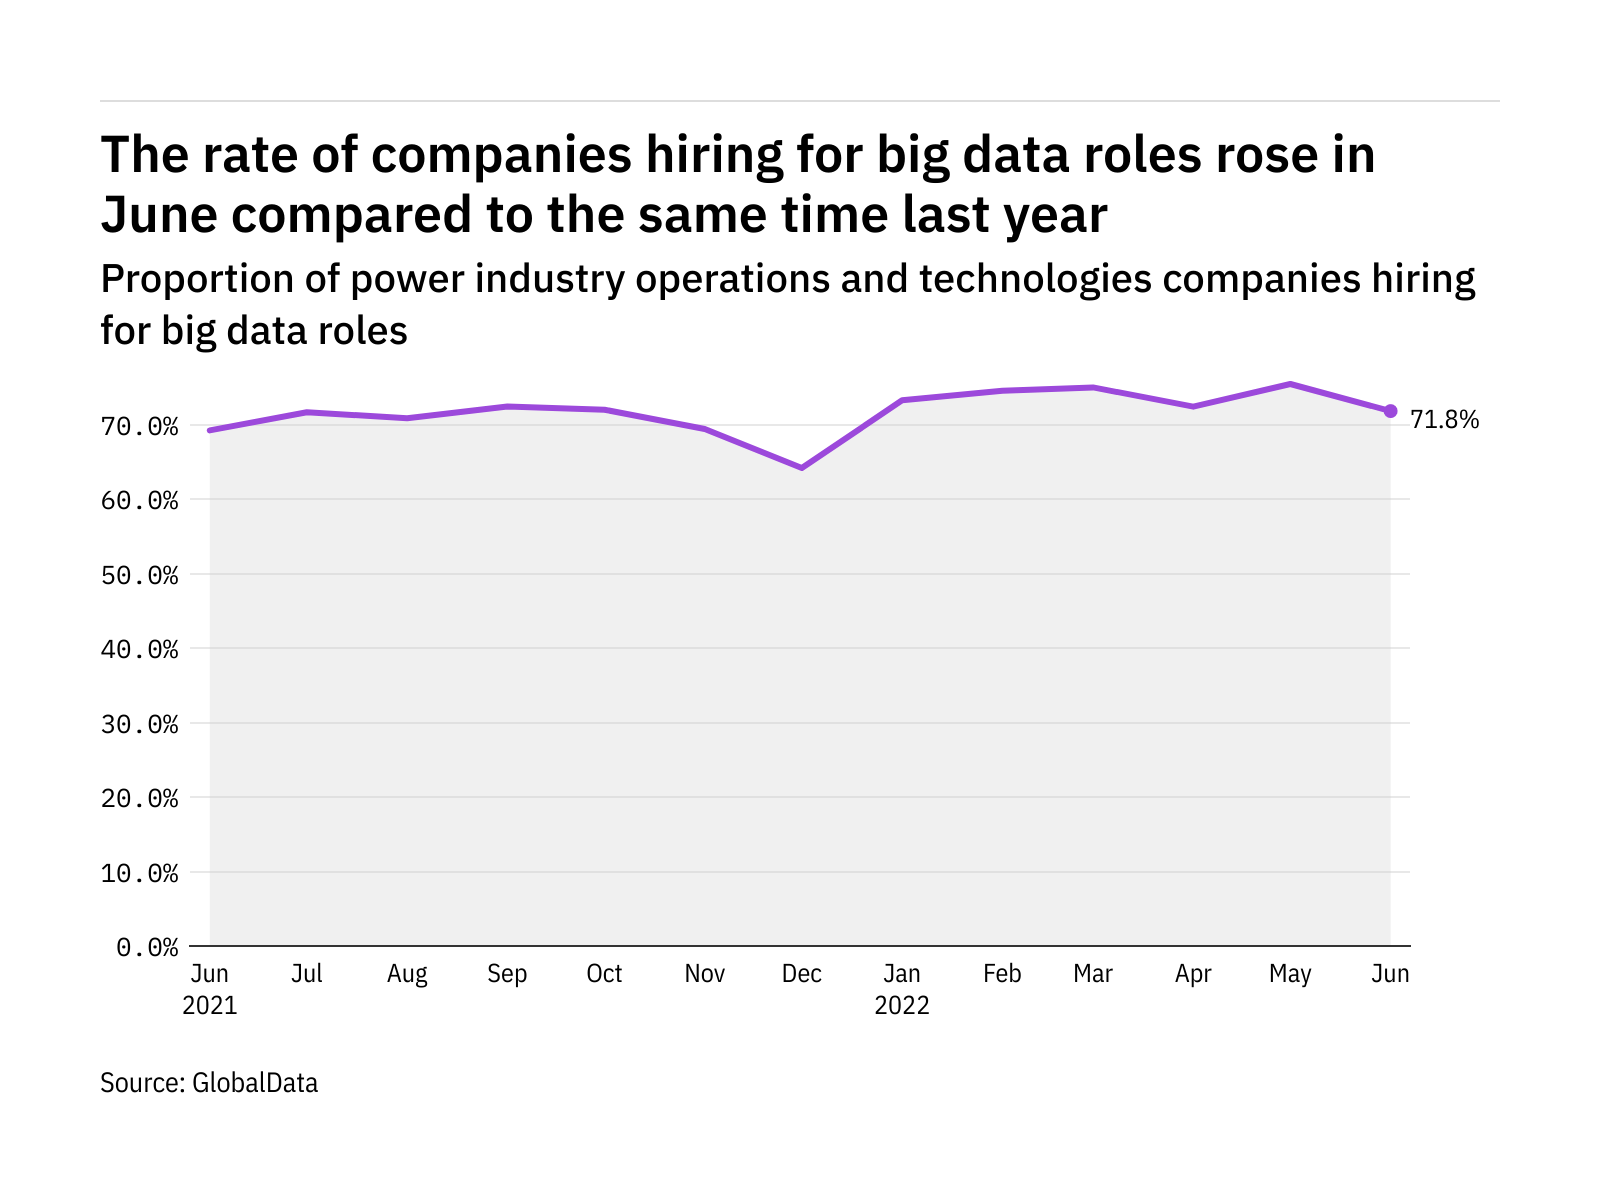 Big data hiring levels in the power industry rose in June 2022